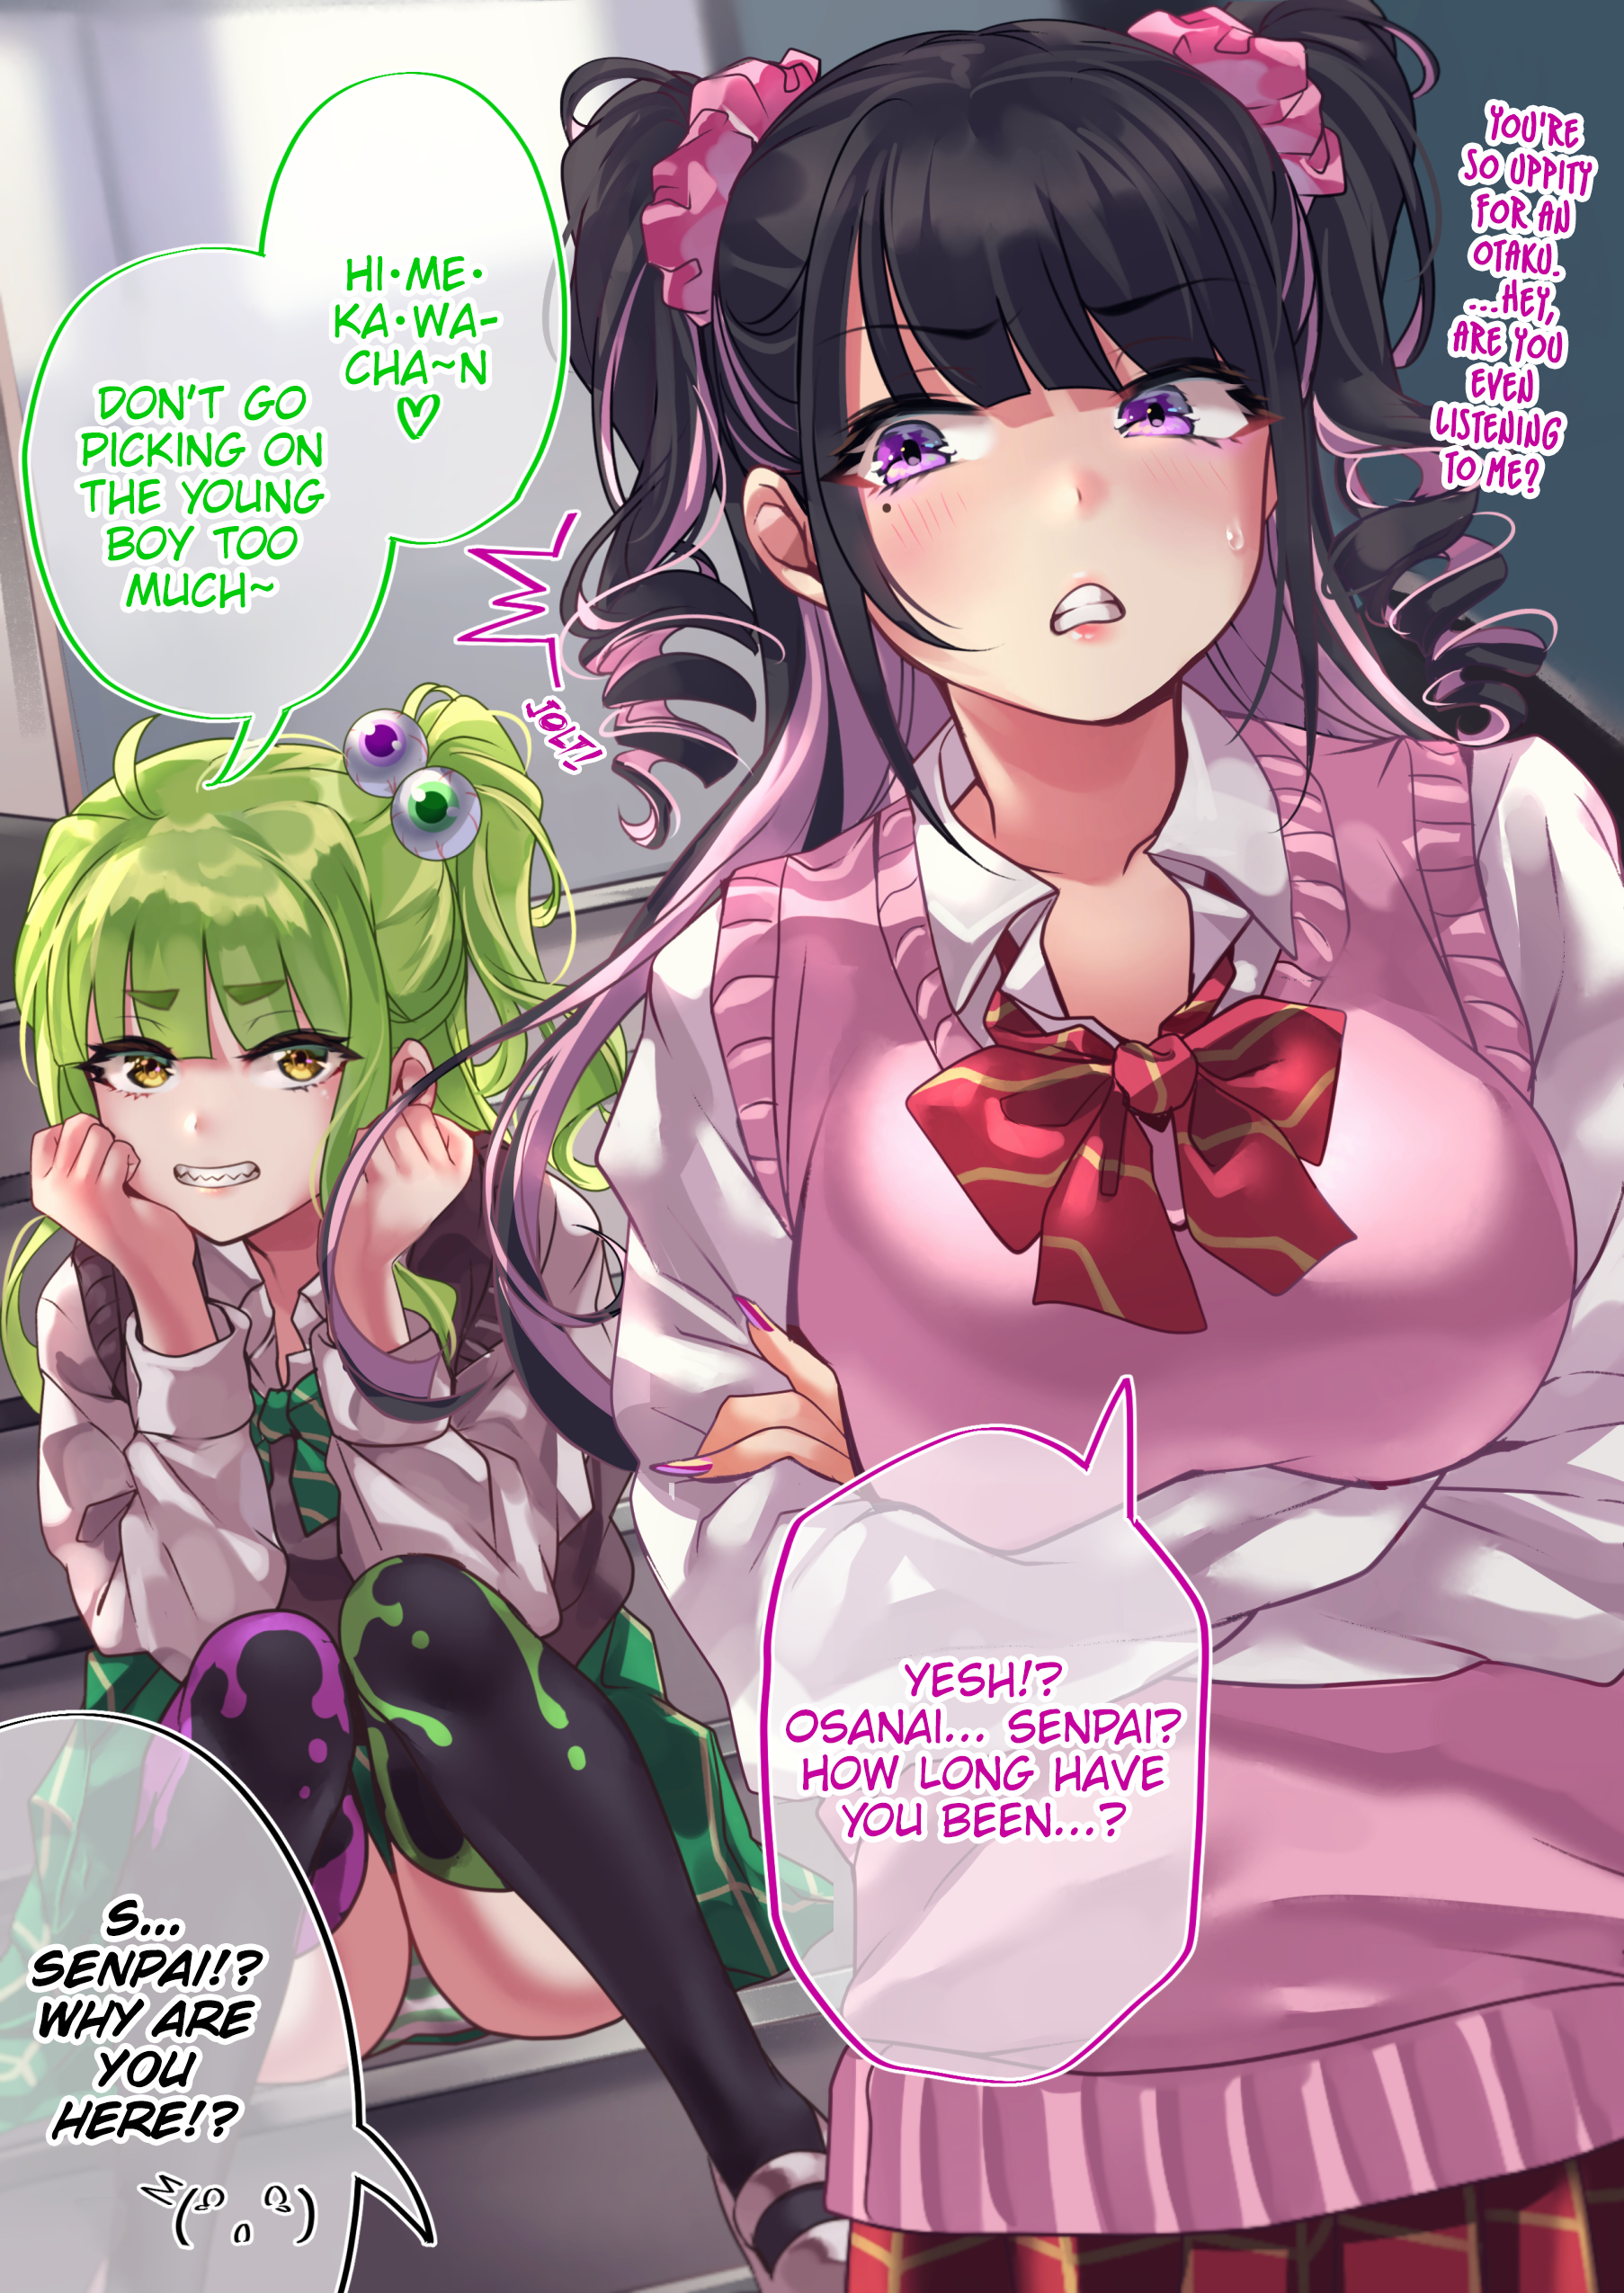 The Story Of An Otaku And A Gyaru Falling In Love - 64 page 2